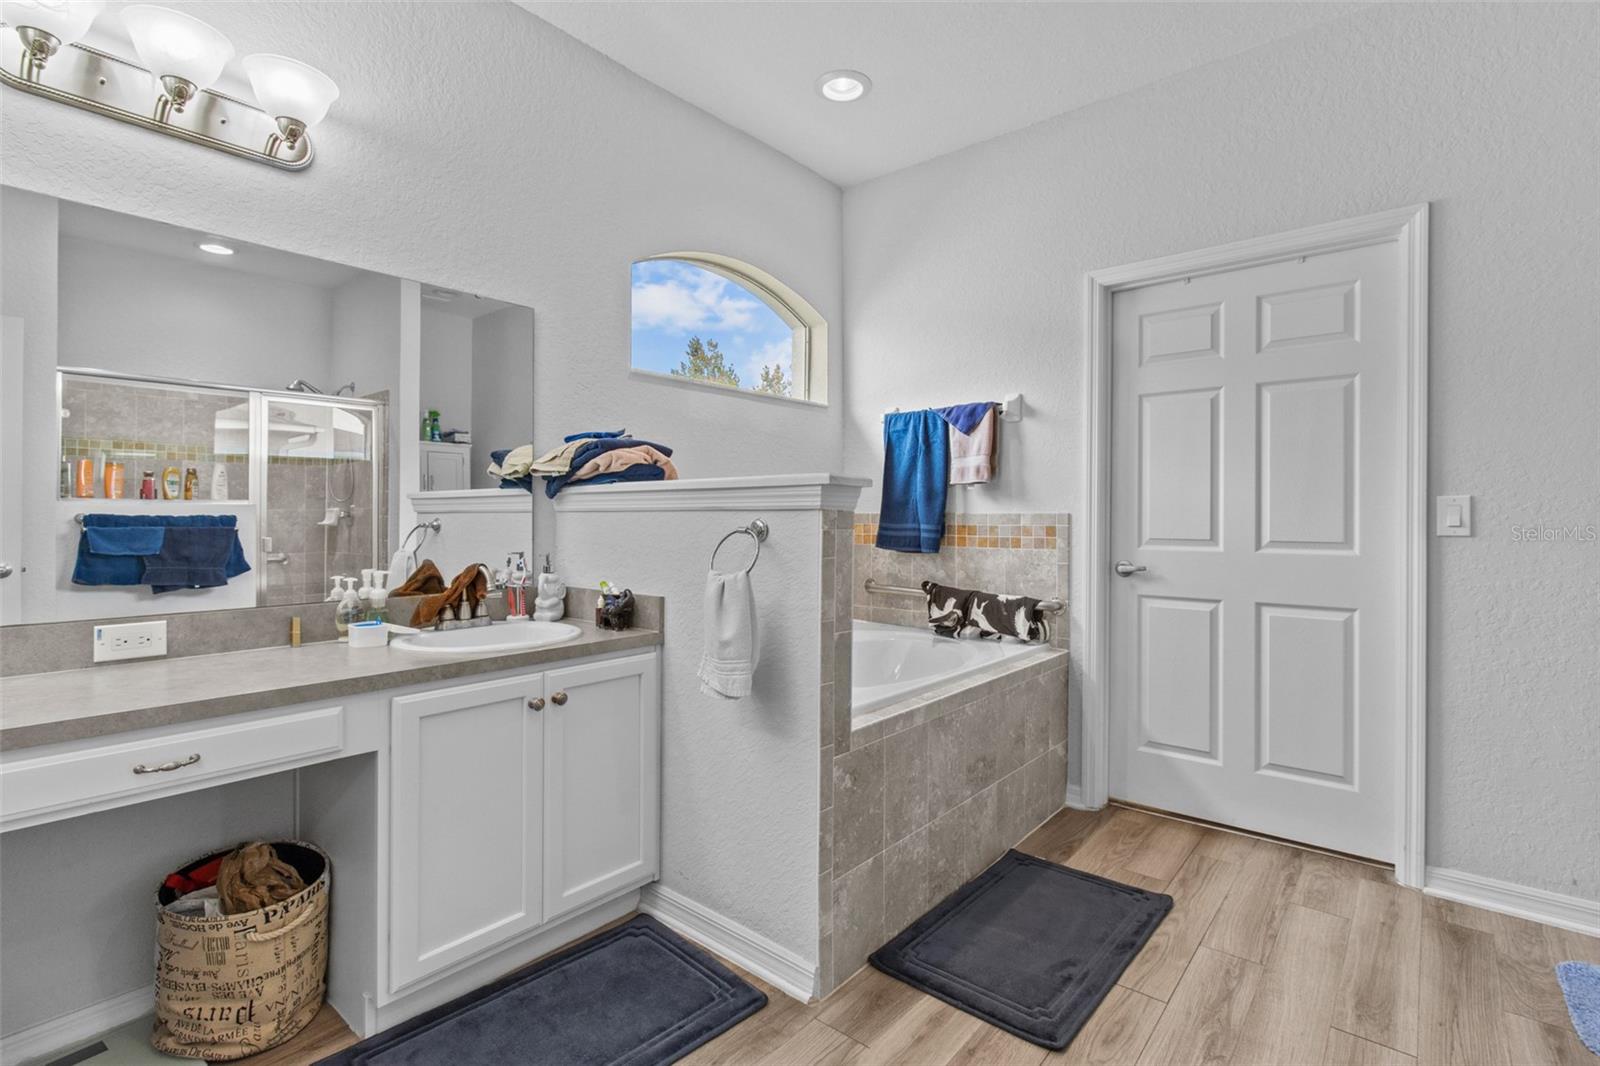 Generous sized master bath with great lighting